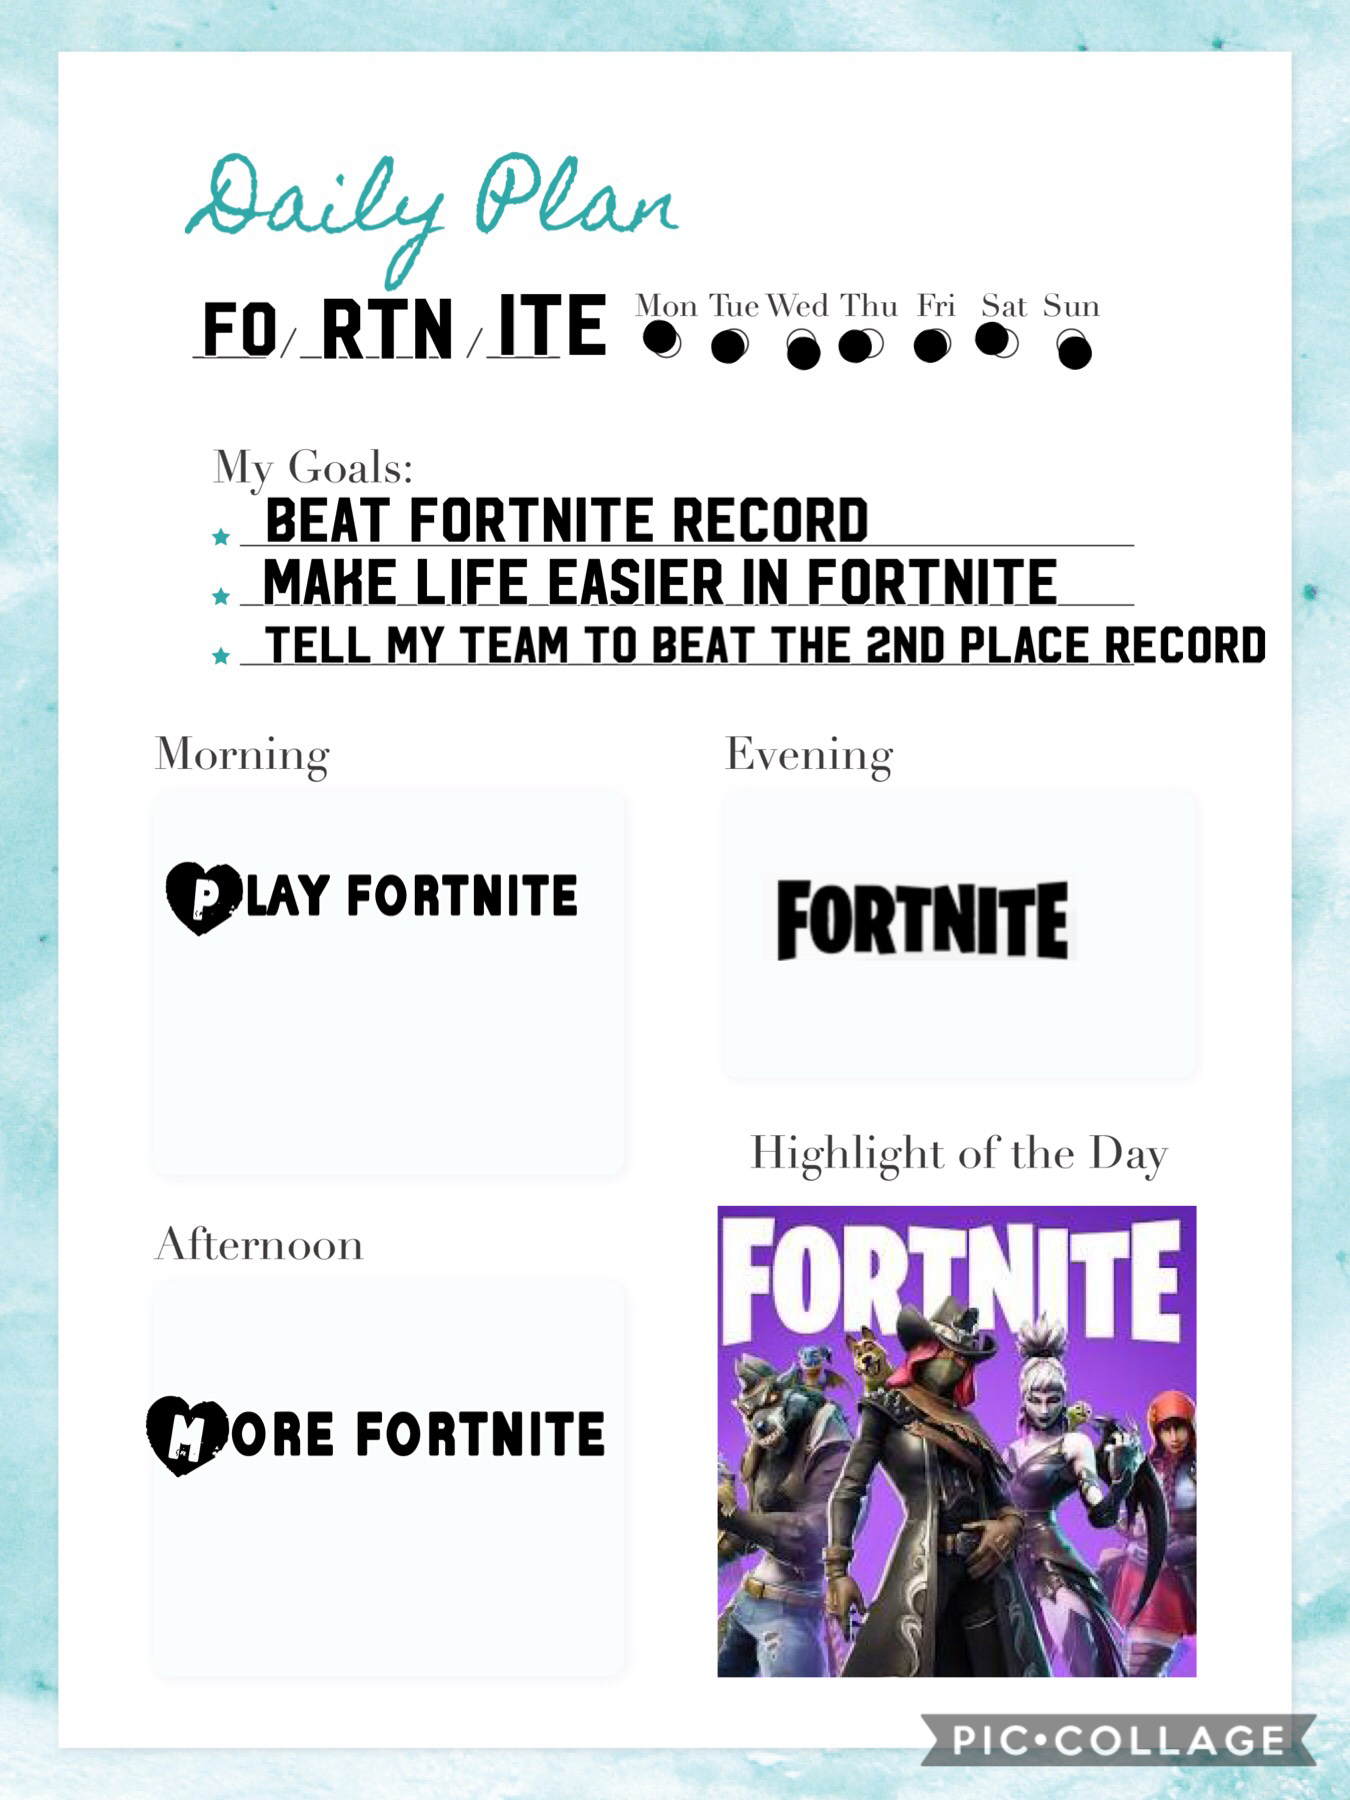 Be lazy 😴🐐play fortnite,
You get the idea 💡😂 